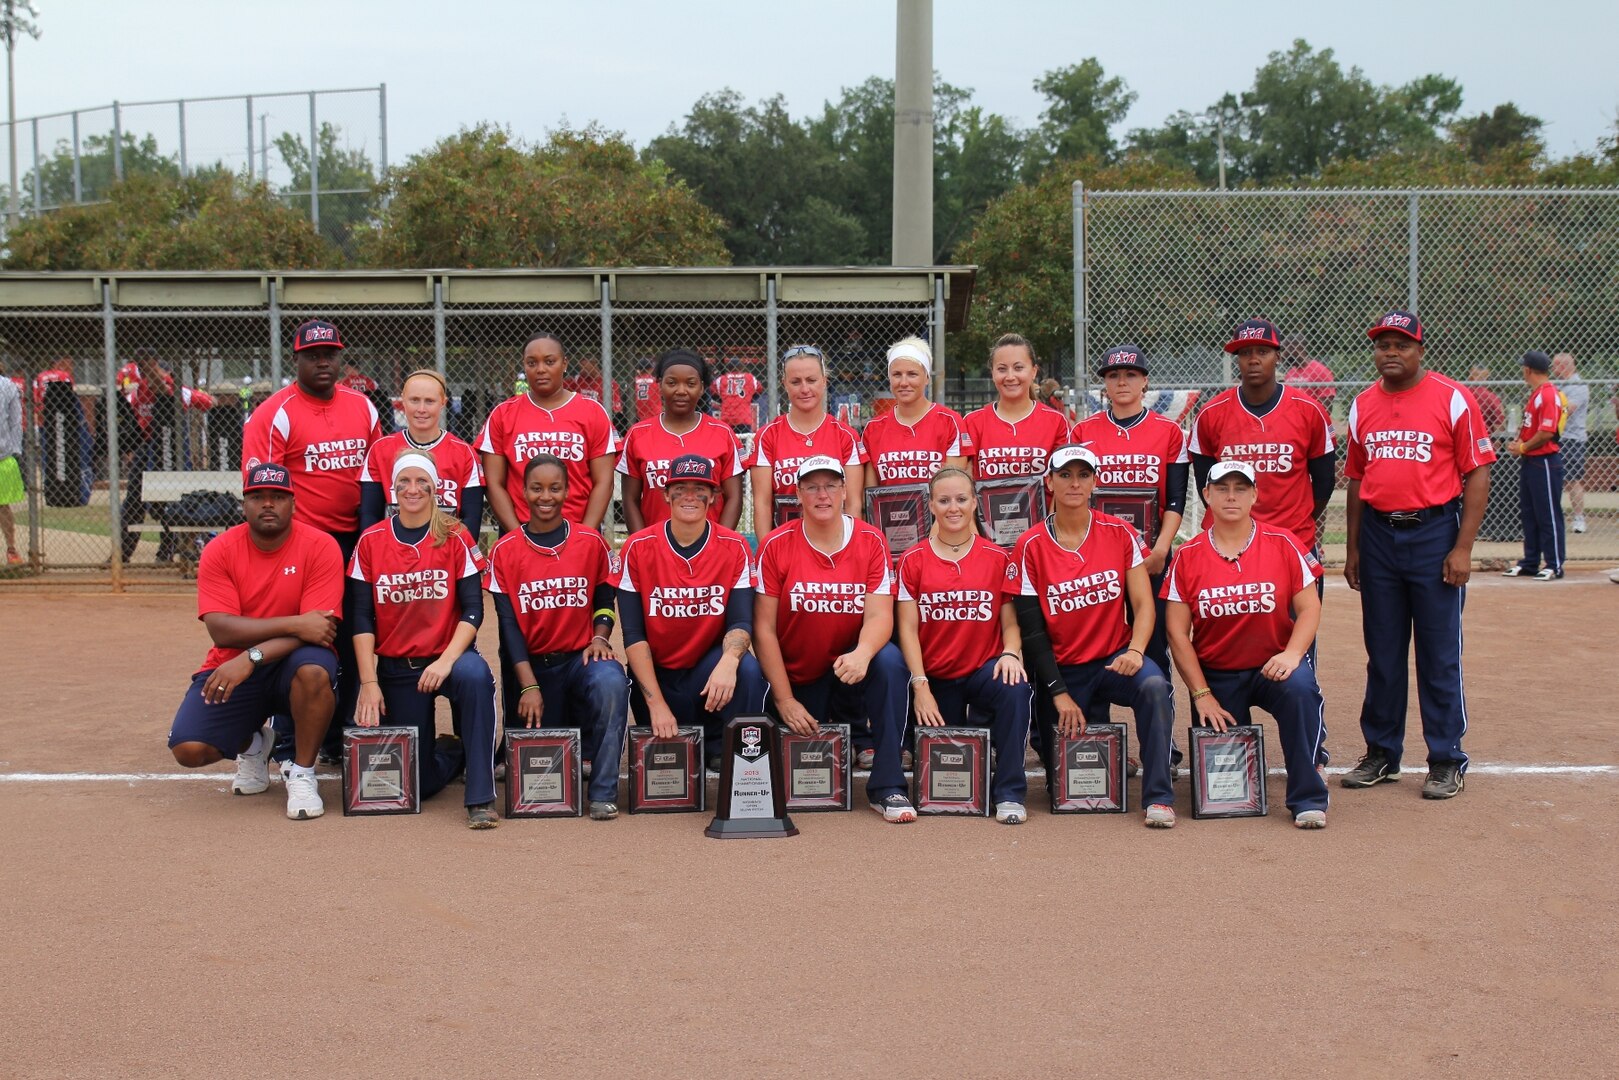 The 2013 Armed Forces Womens Softball Team took silver at ASA National Softball Championship in Ridgeland, MS 26-30 September.